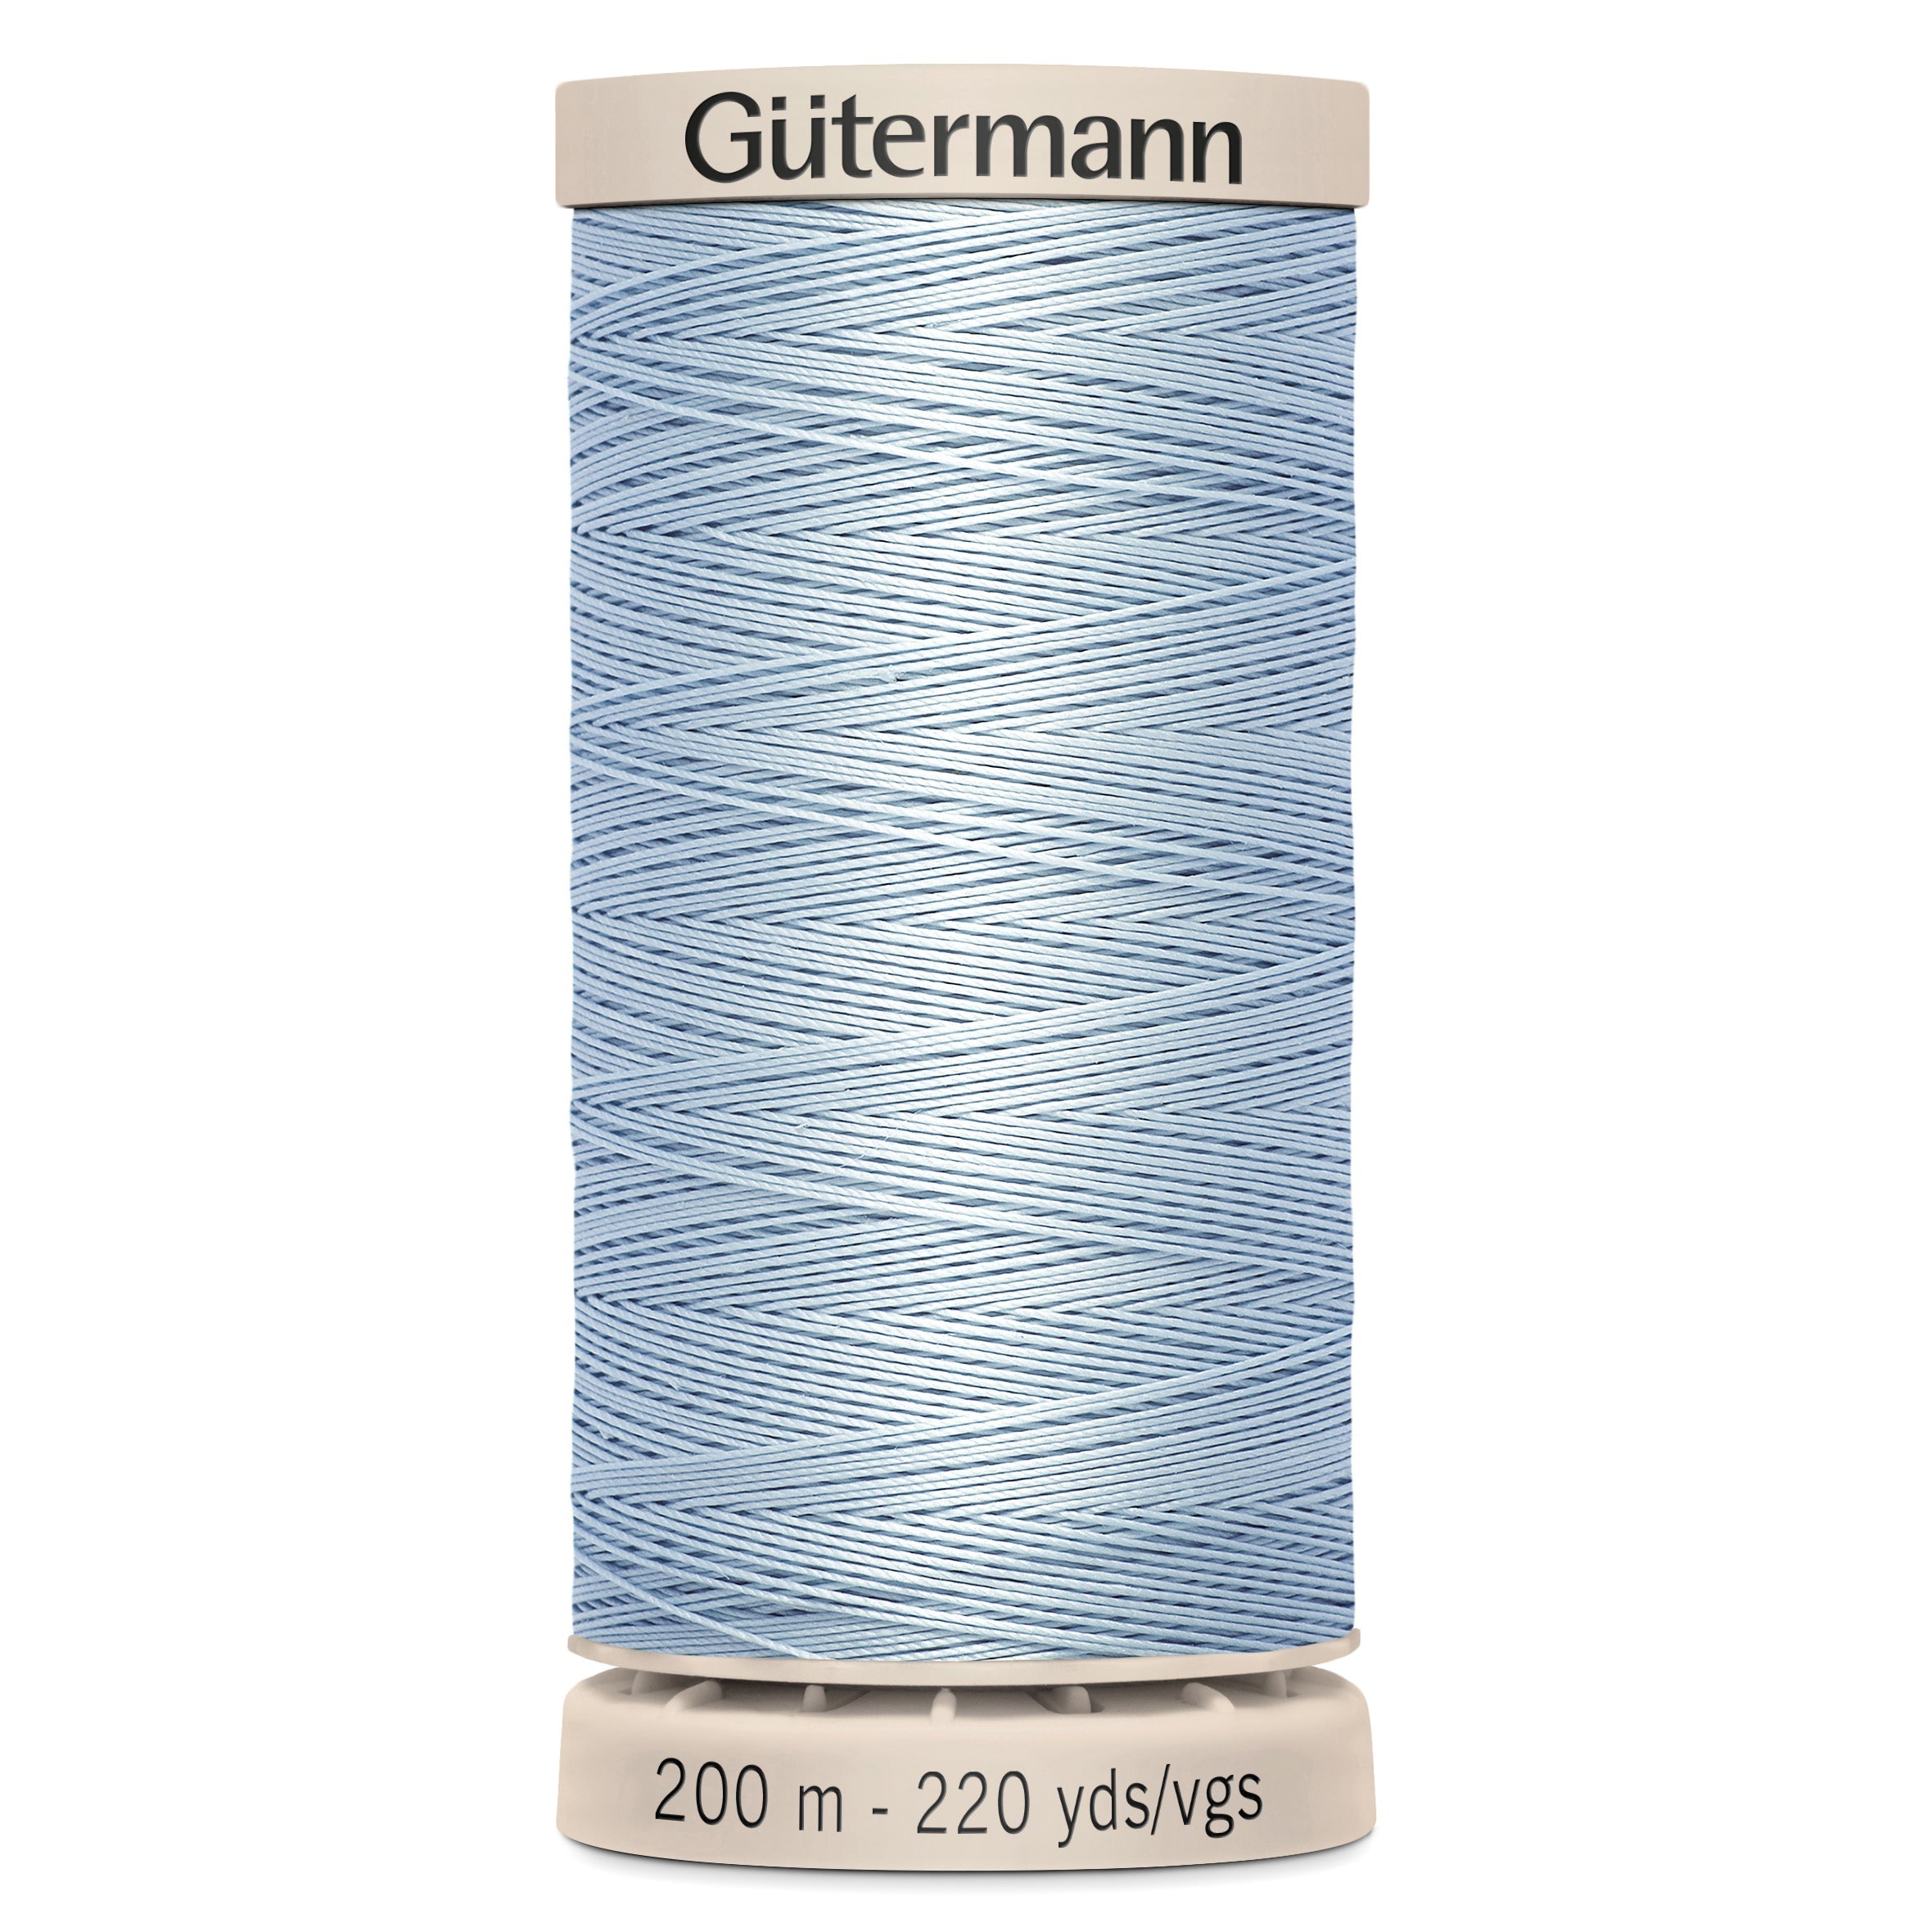 Gutermann Hand Quilting Cotton - 6217 from Jaycotts Sewing Supplies